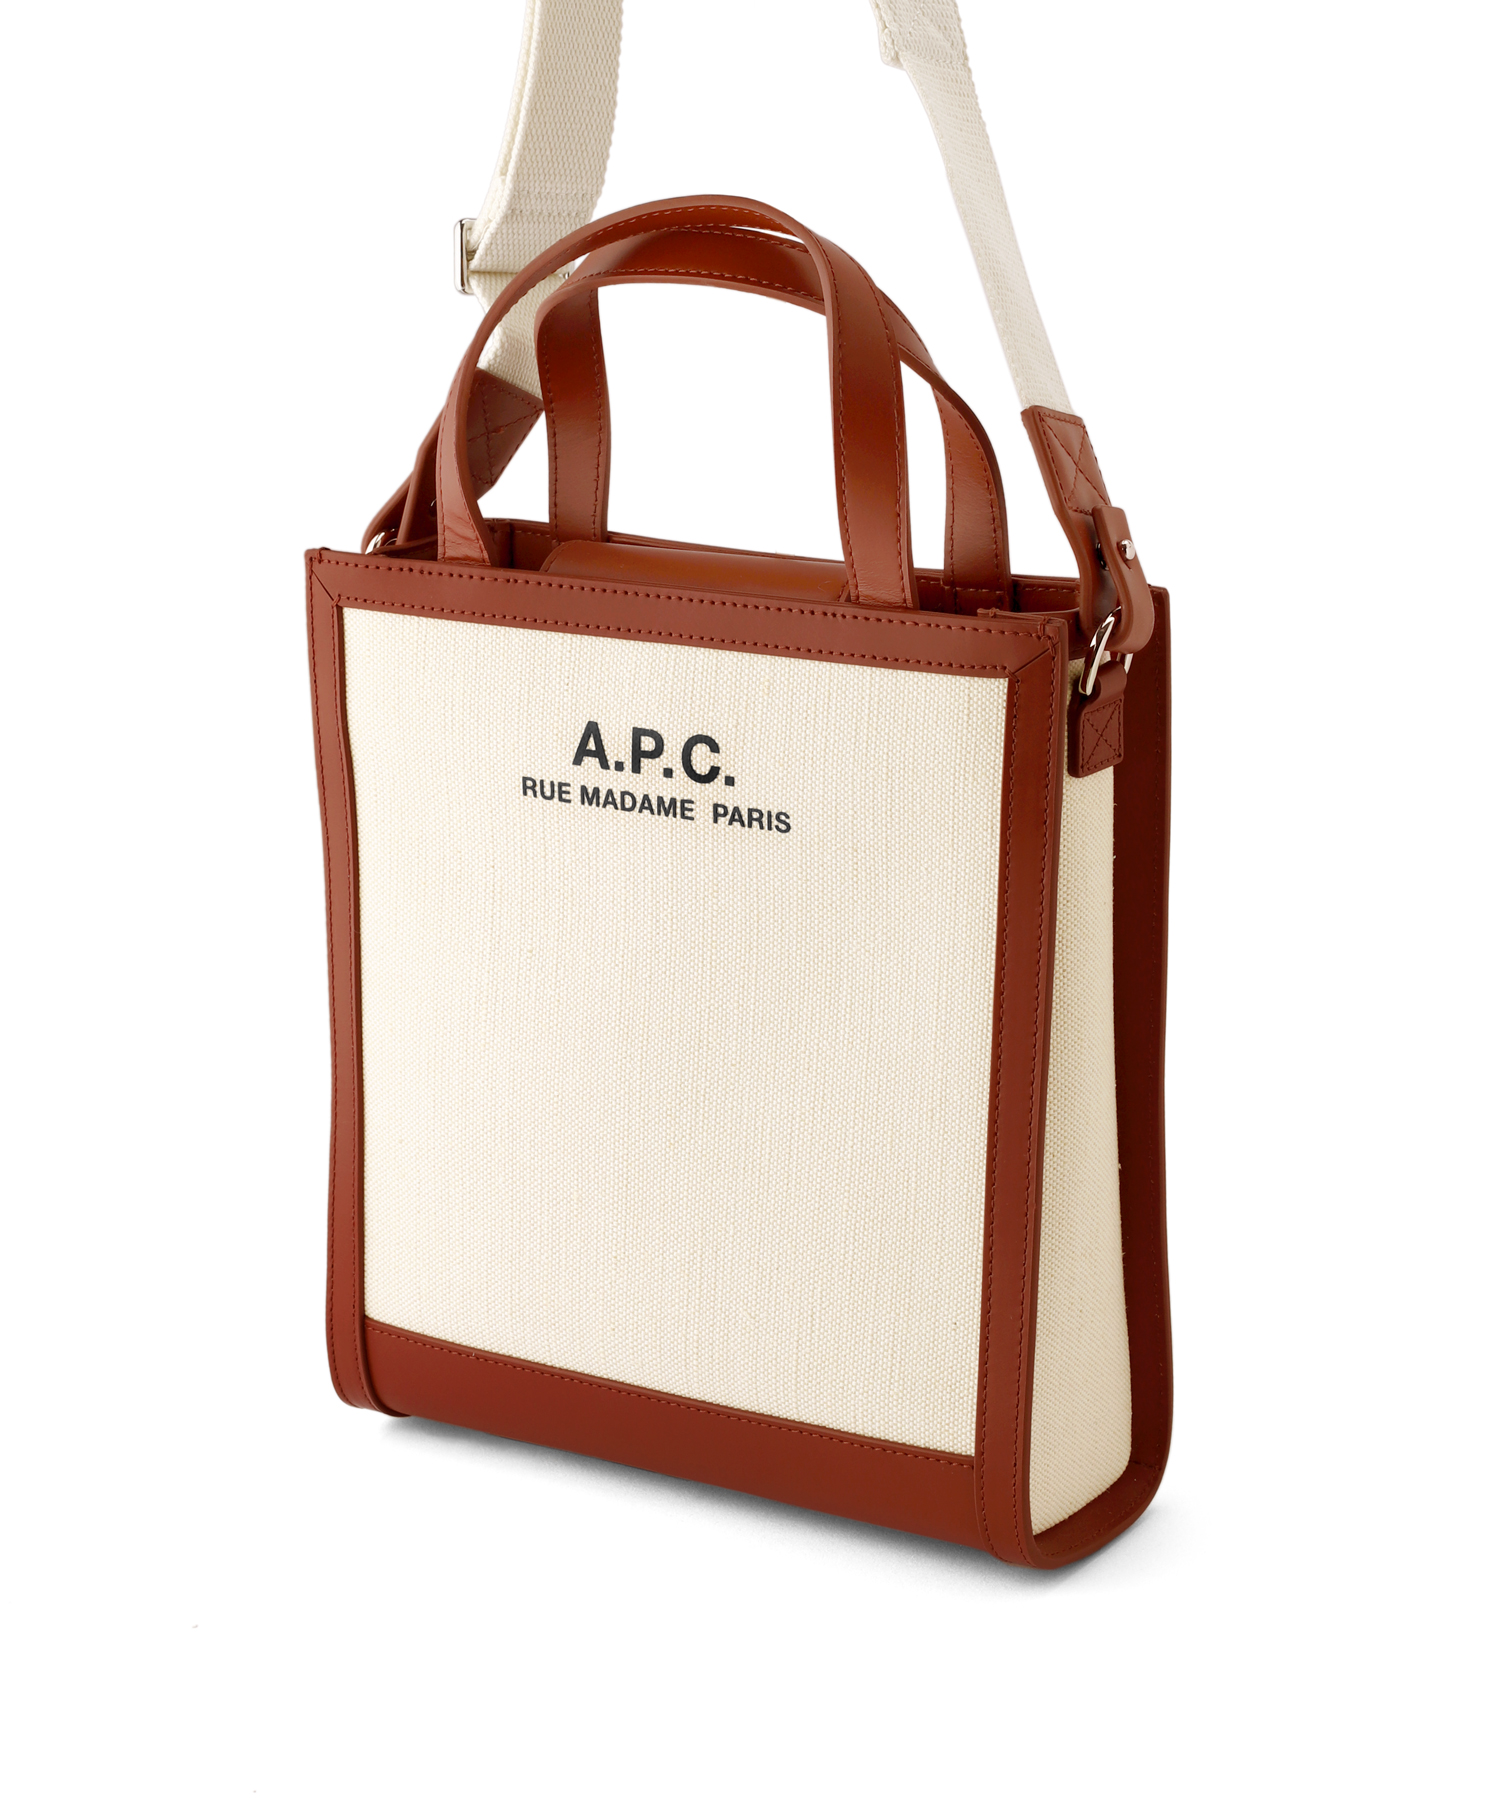 APC A.P.C. トートバッグ tote camille 2.0 COEYO内側にポケット1つ